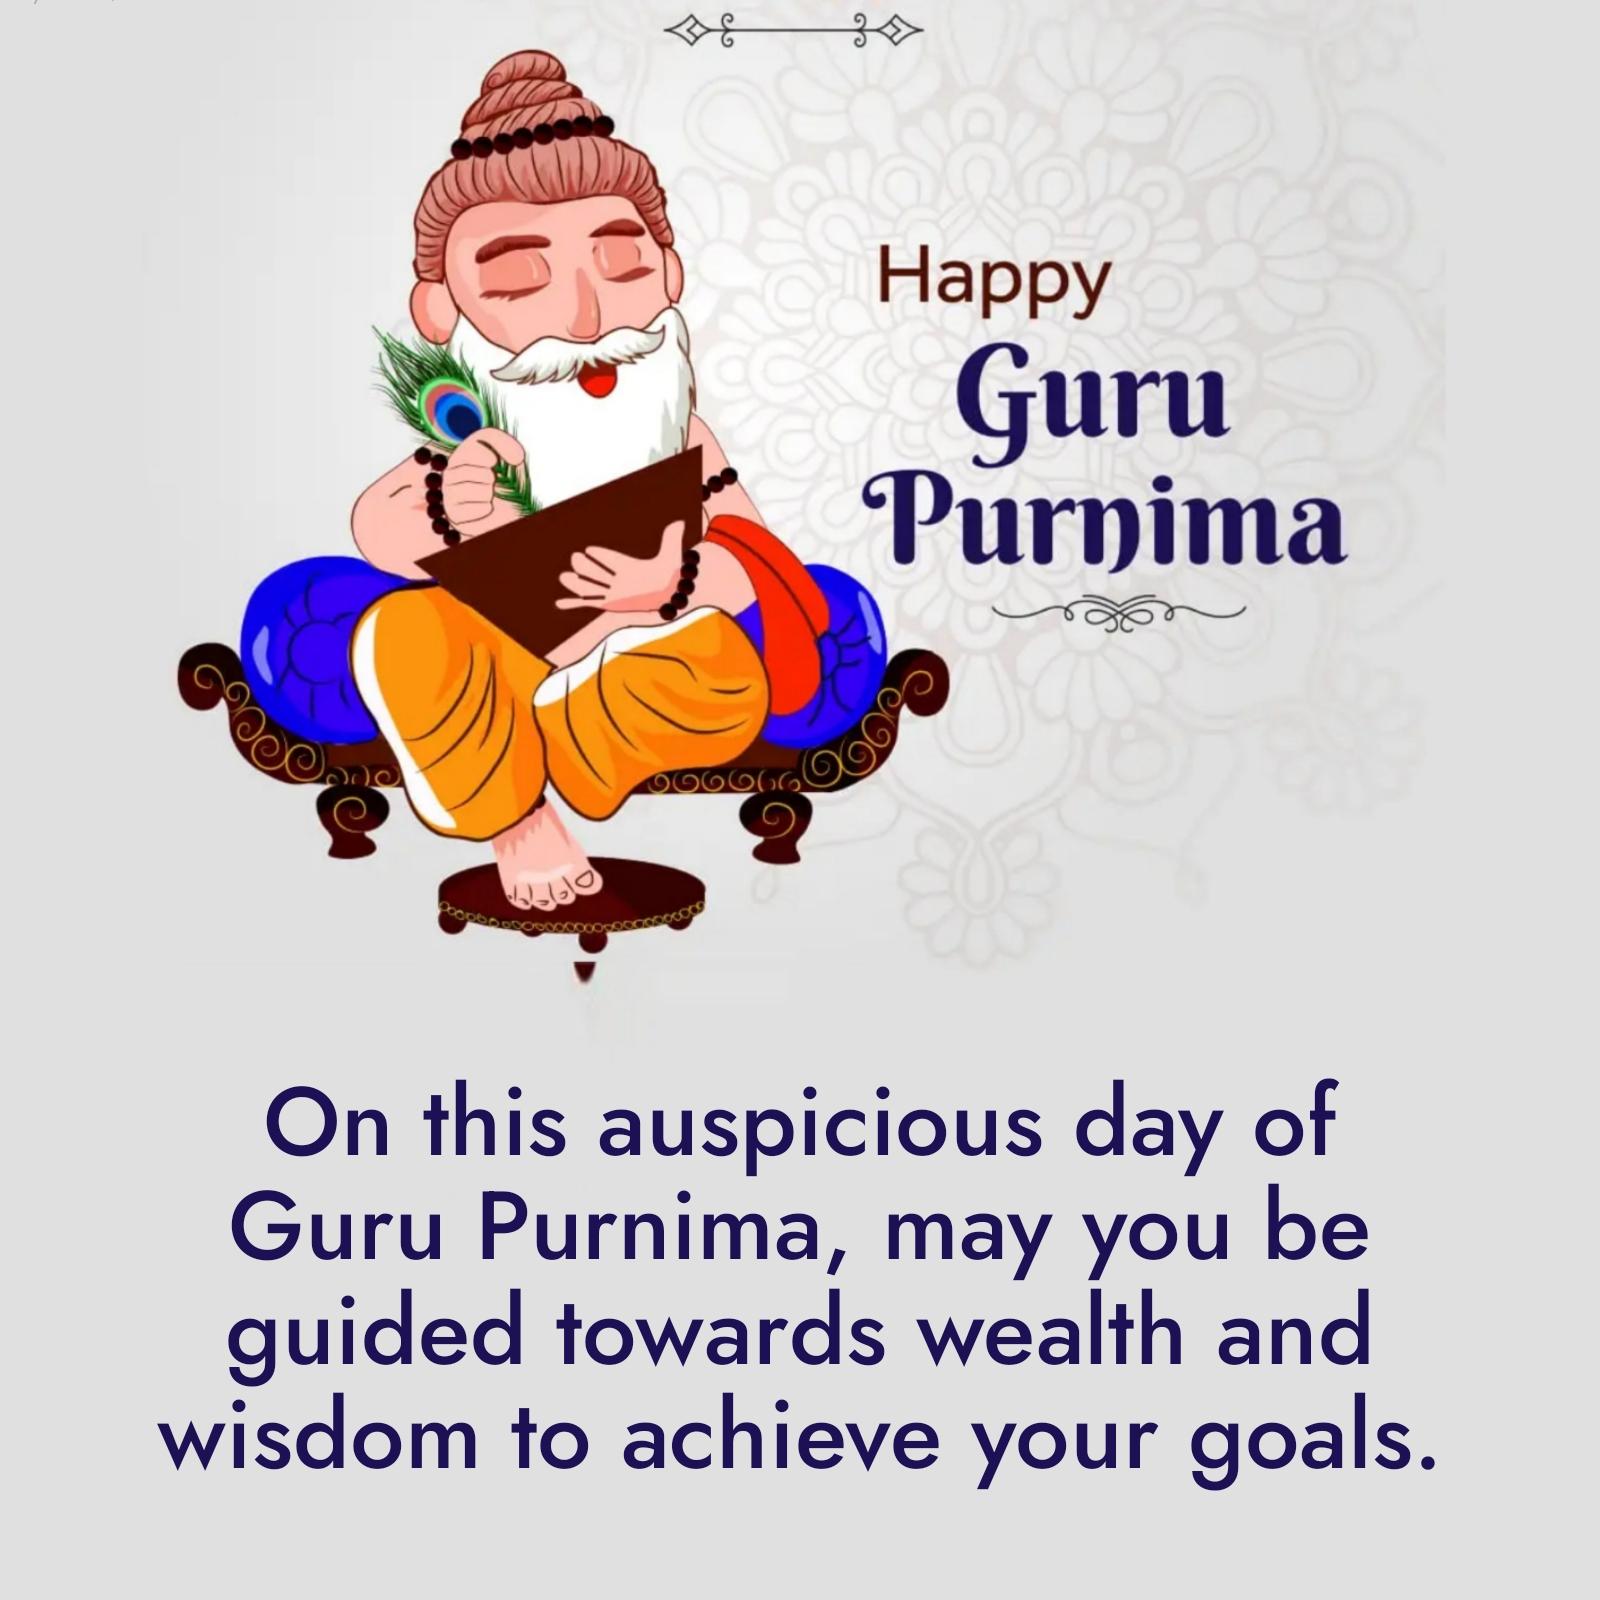 On this auspicious day of Guru Purnima may you be guided